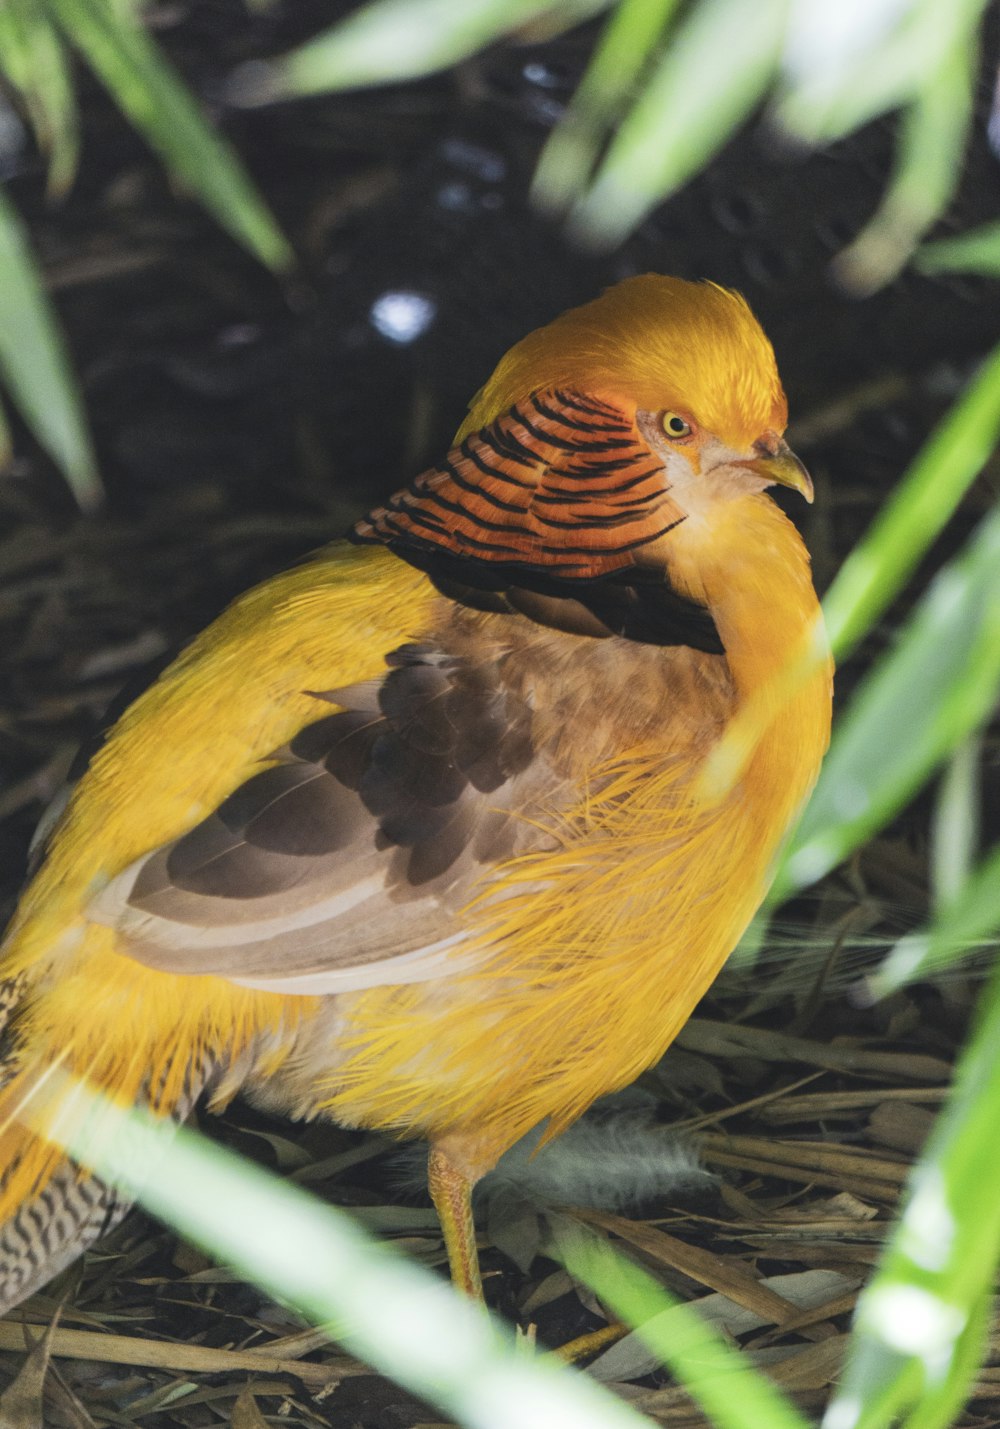 a yellow and brown bird sitting on the ground